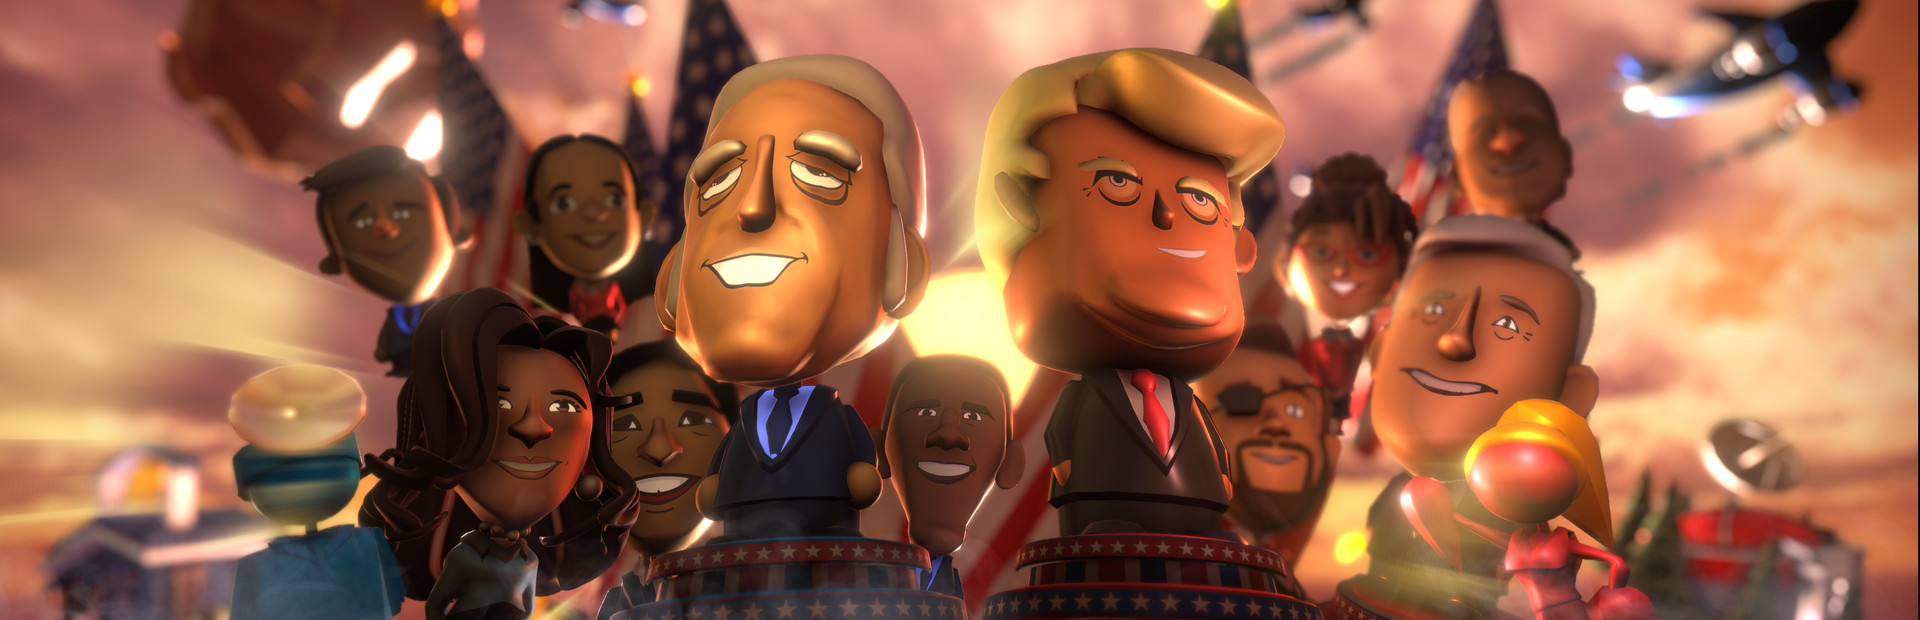 The Political Machine 2020 cover image